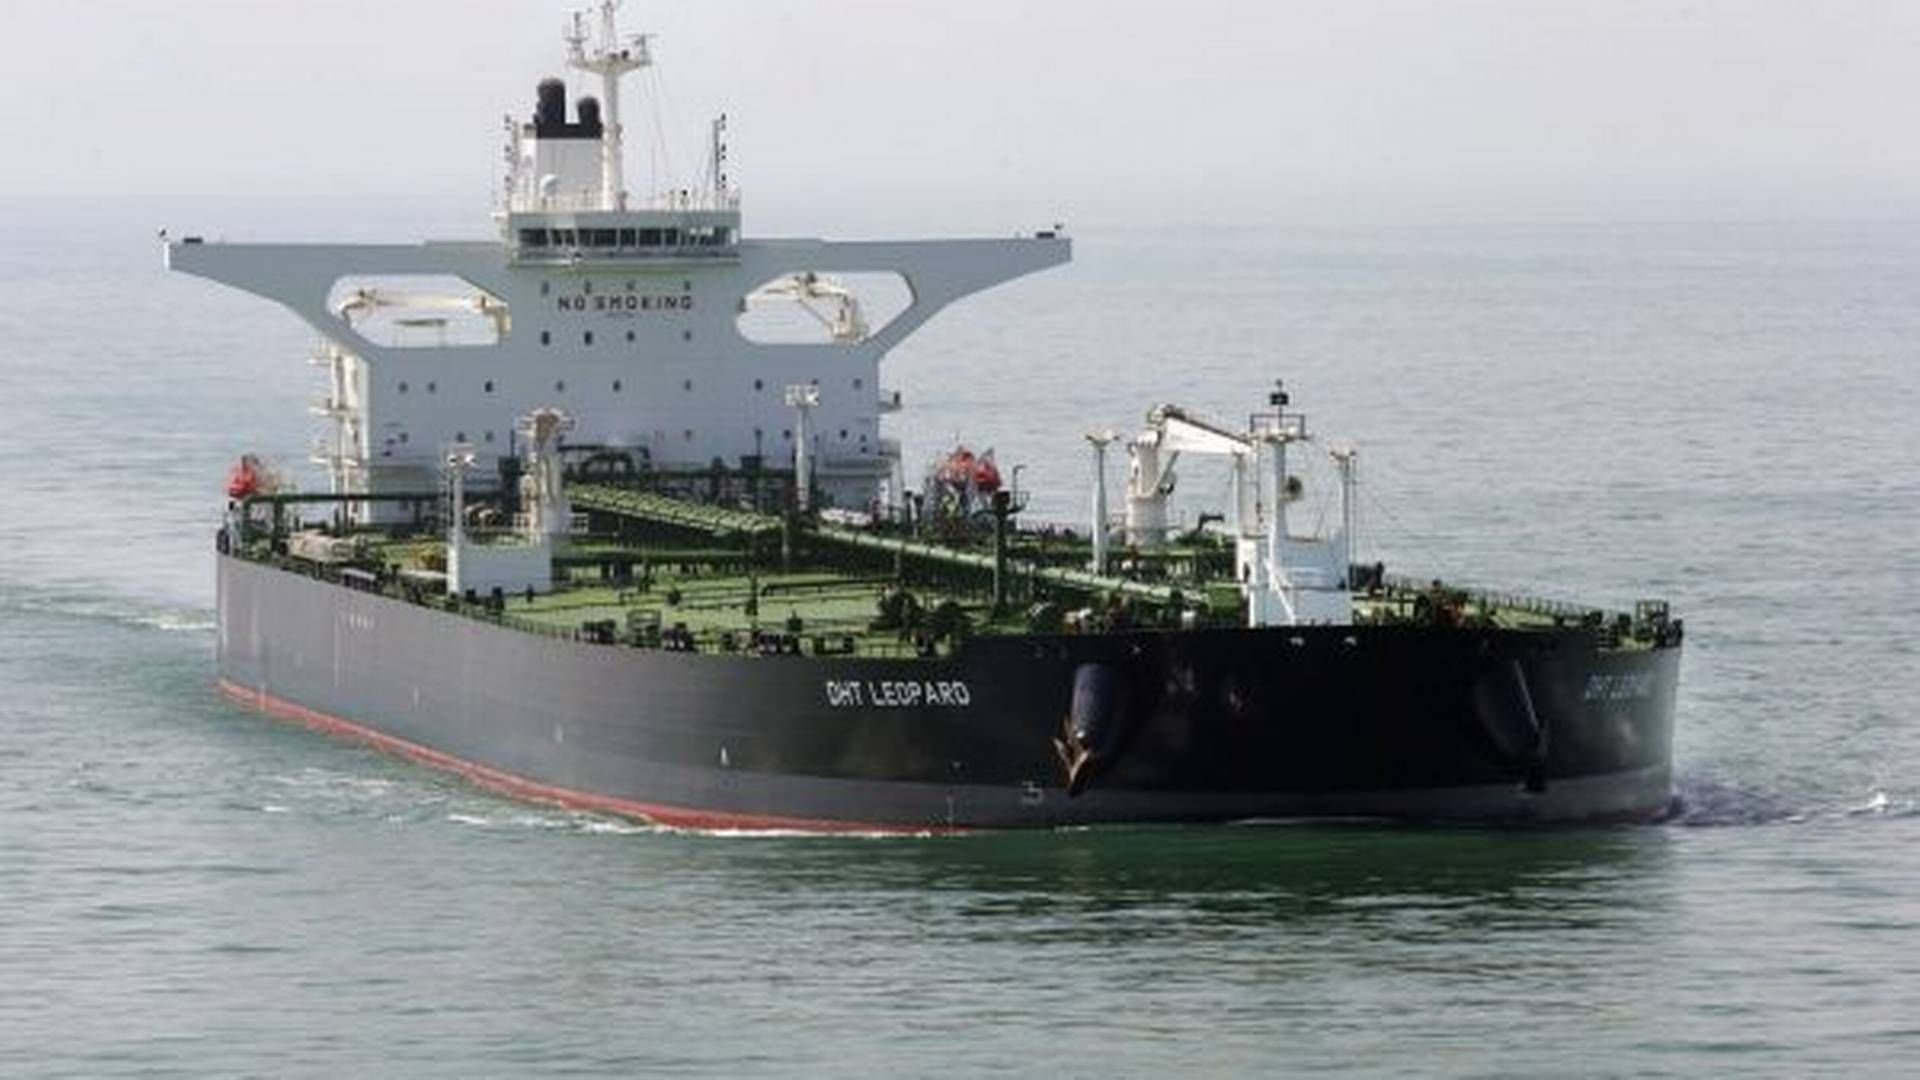 The crude oil tanker DHT Leopard. | Photo: DHT Holdings